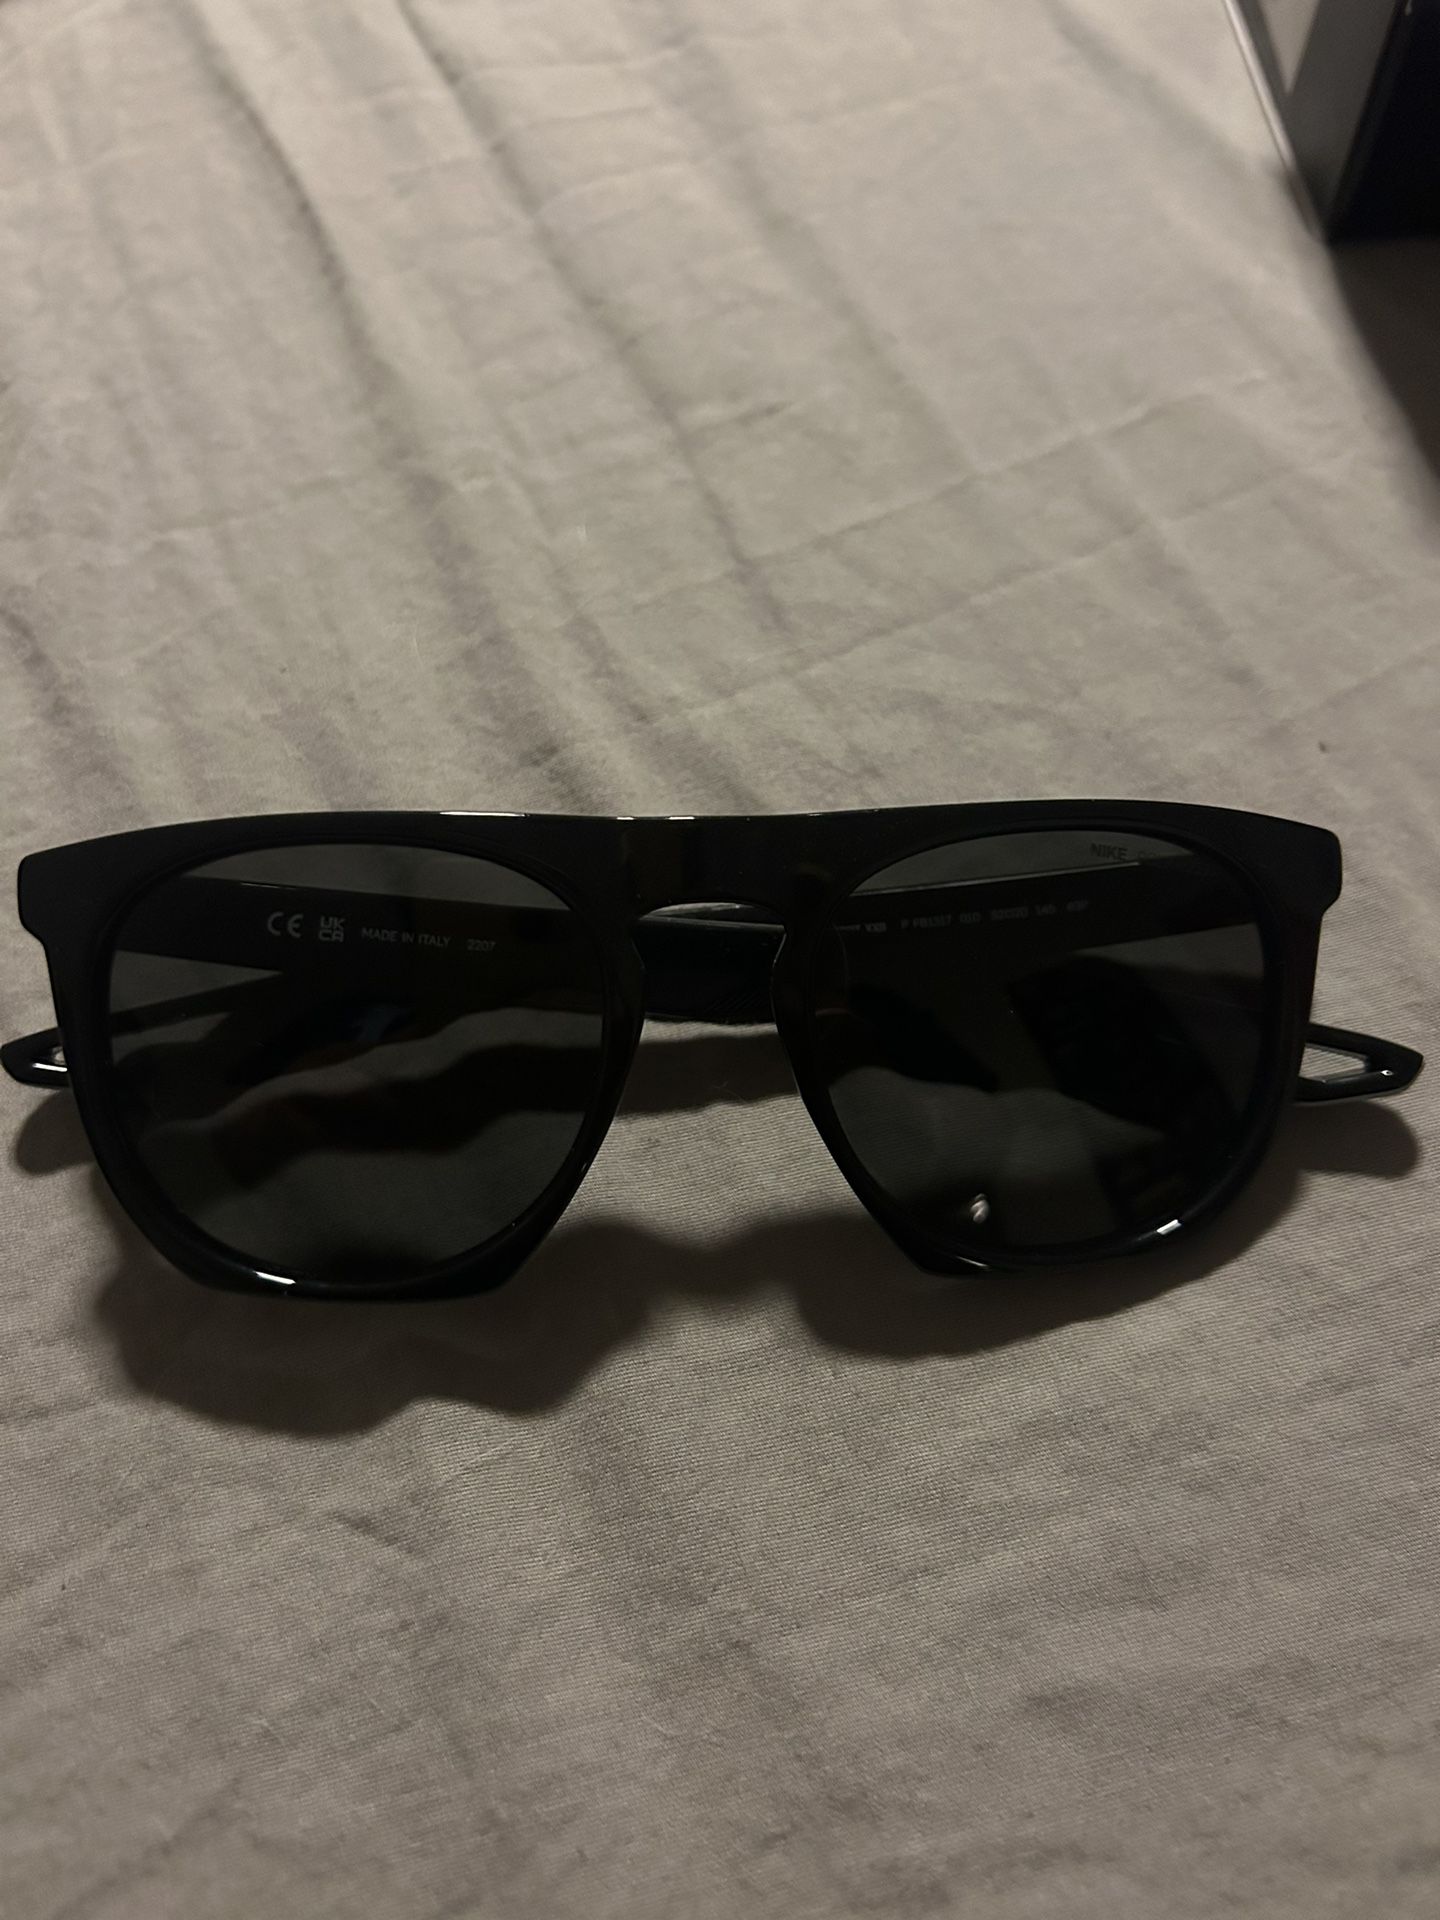 Nike Brand New With Tags Sunglasses 